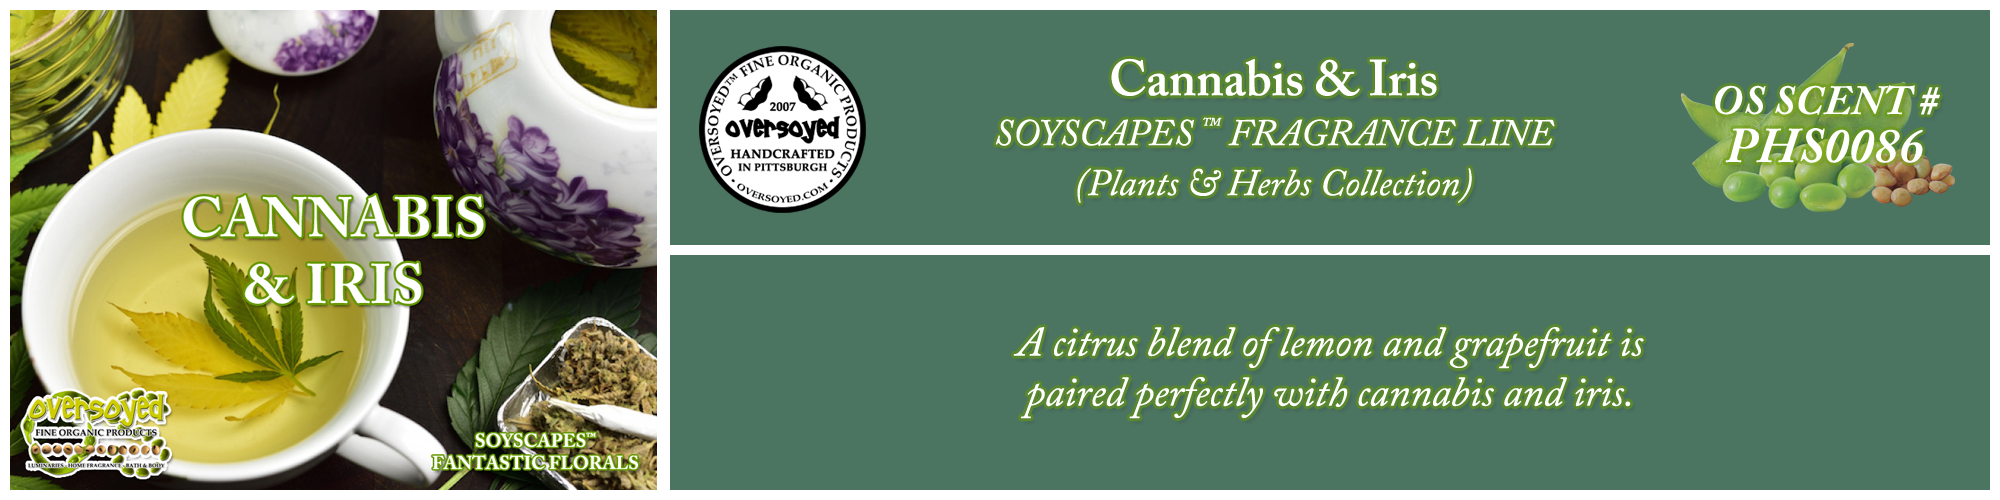 Cannabis & Iris Handcrafted Products Collection